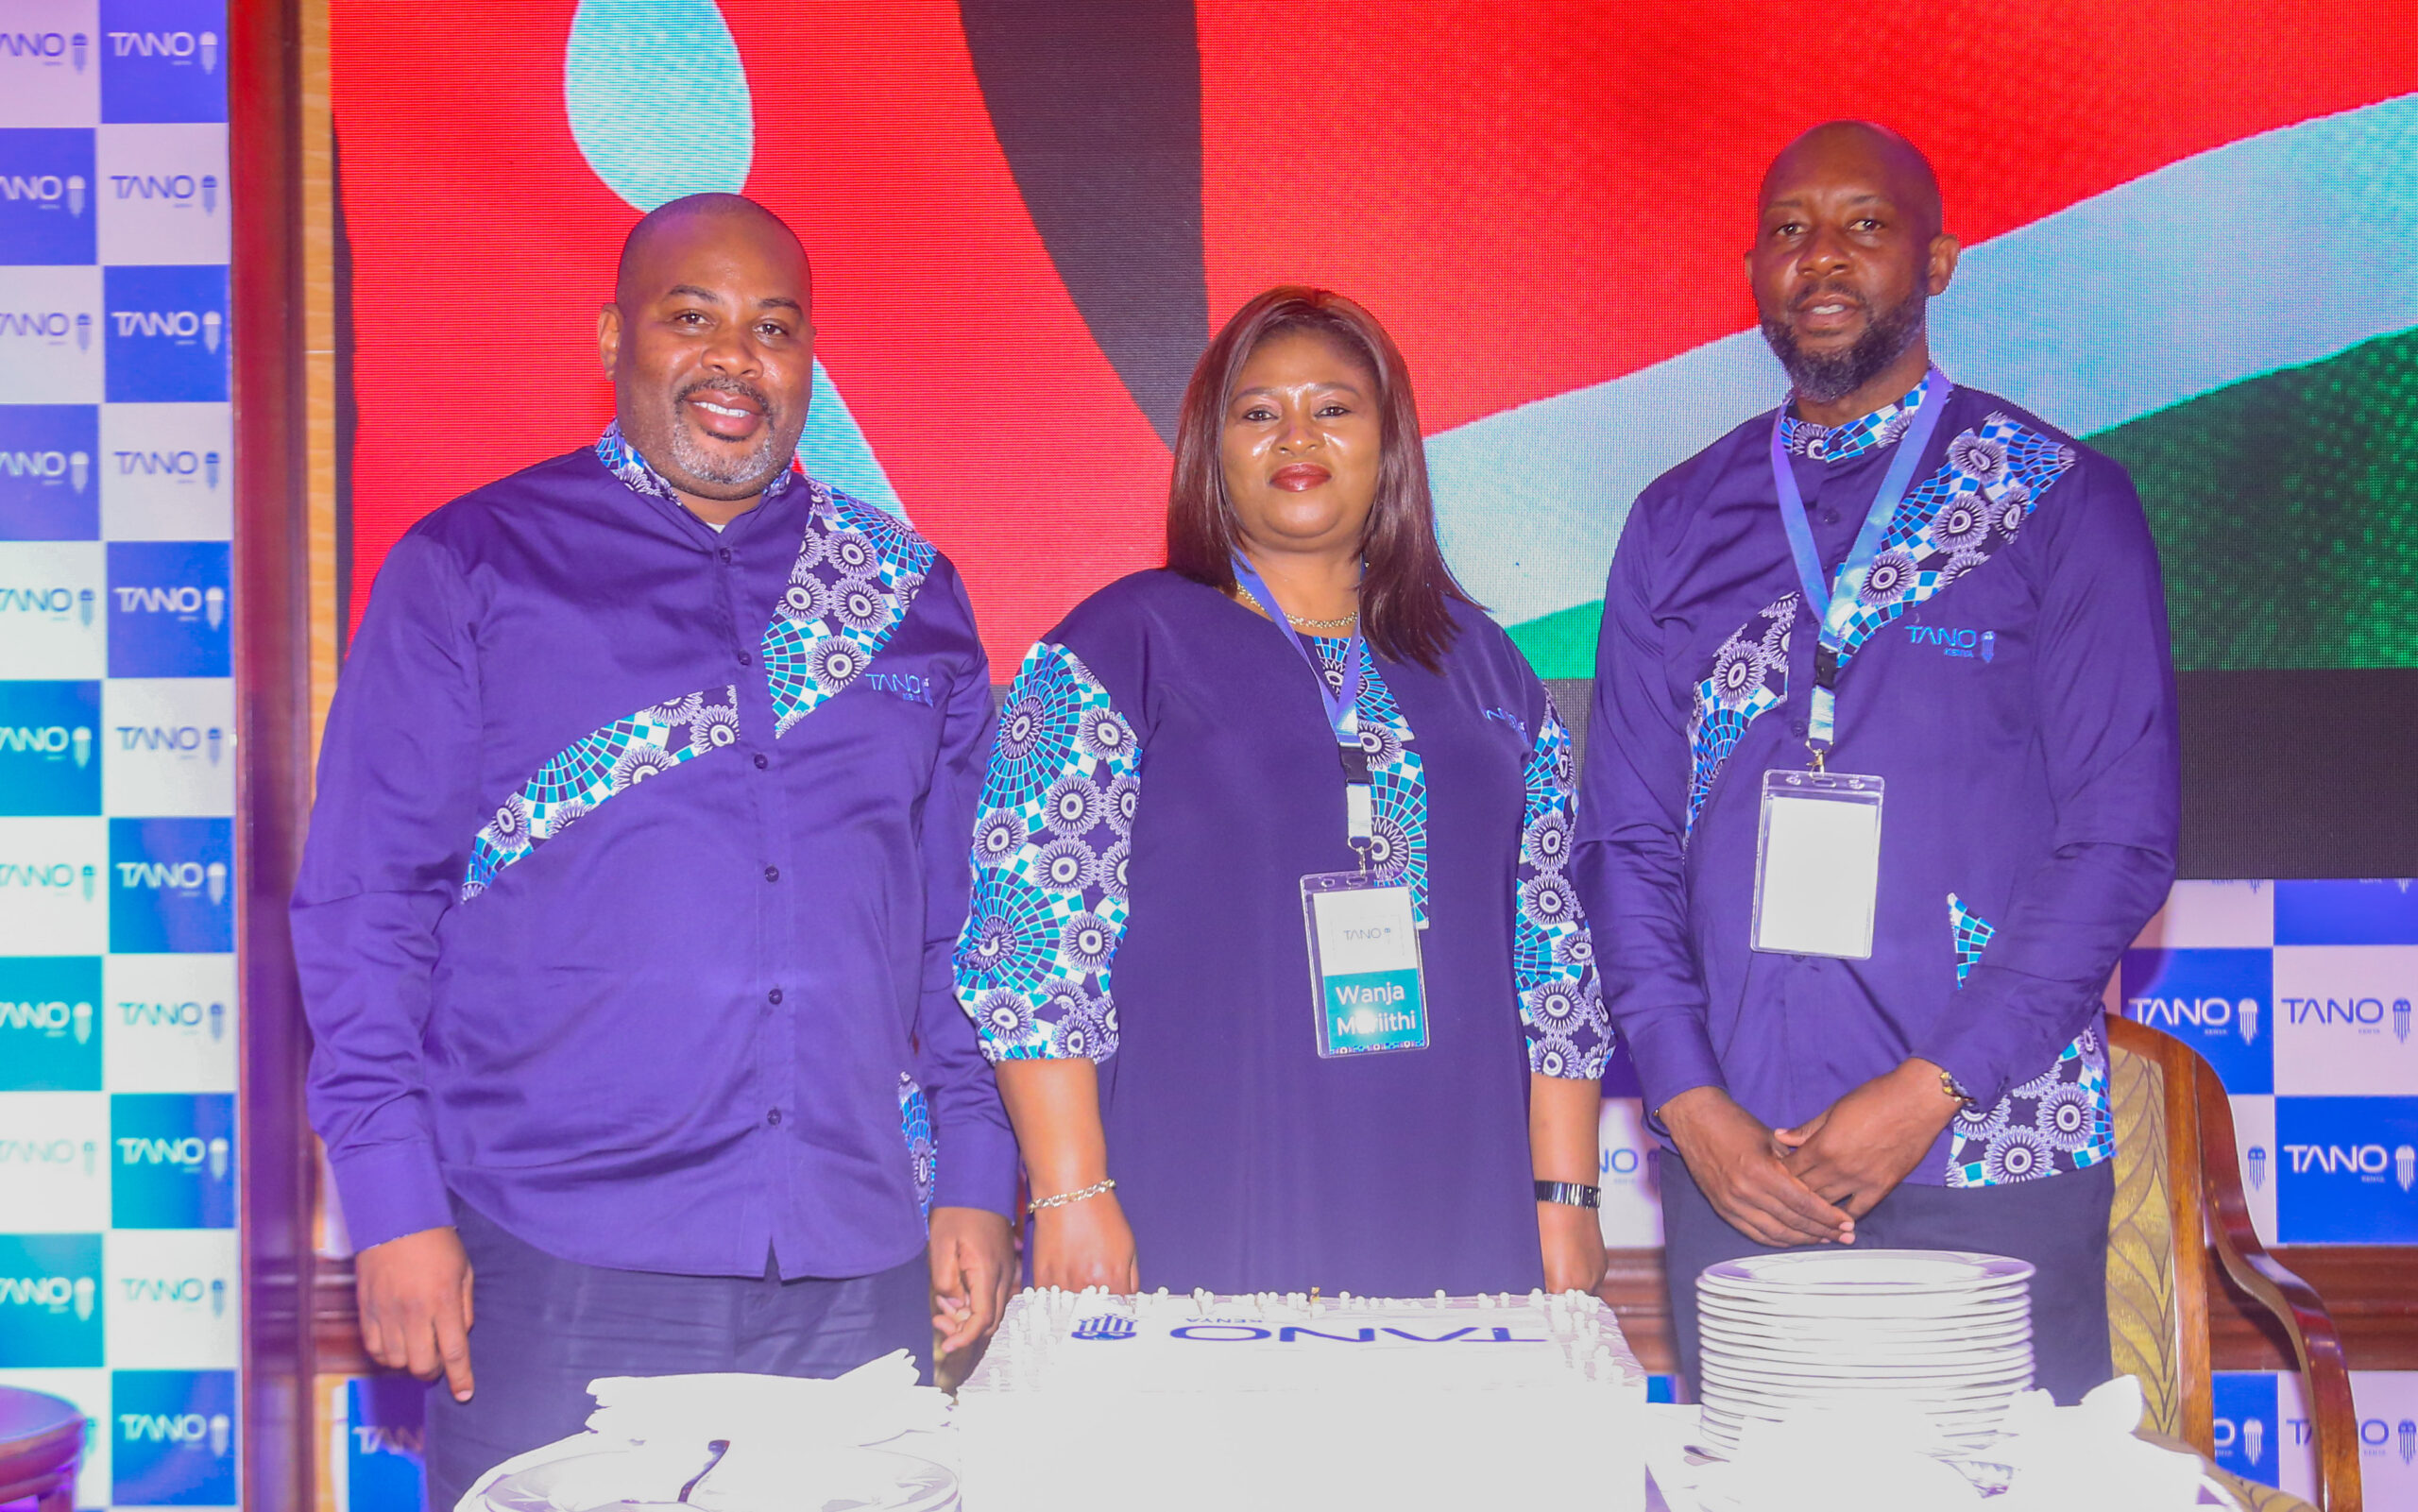 Tano Digital Launches Its Services In Kenya